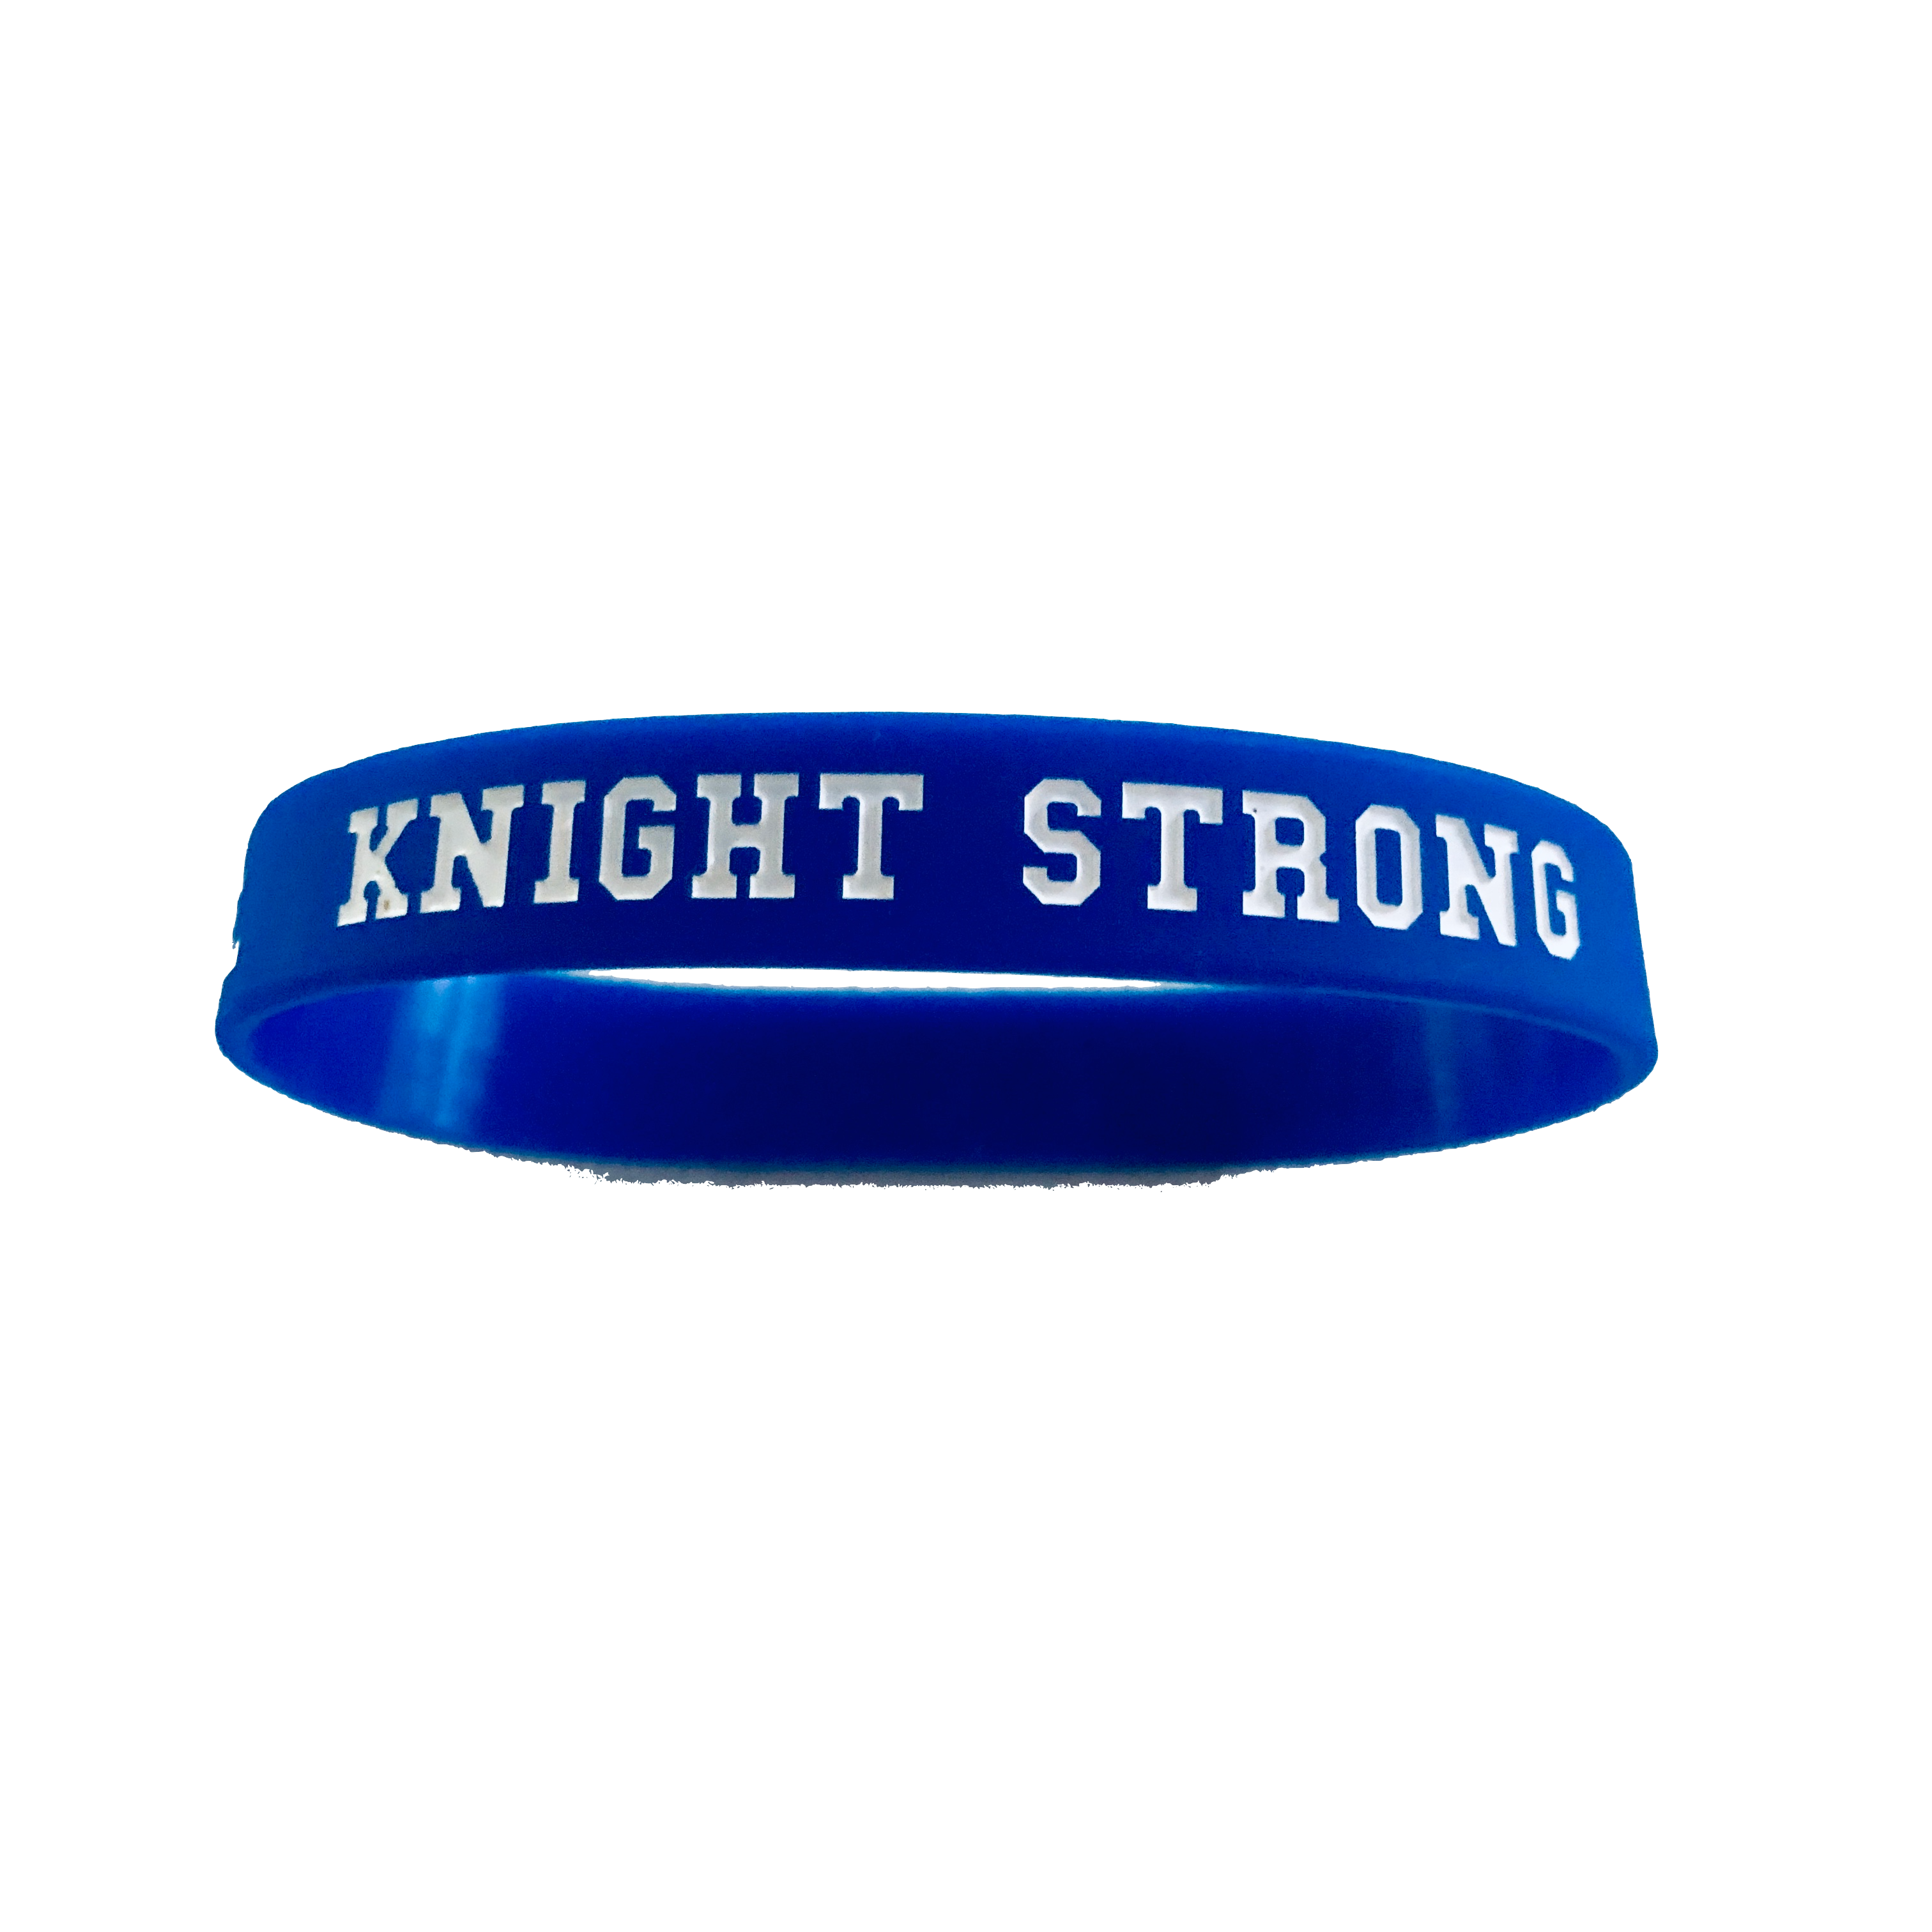 KNIGHT STRONG Wristband